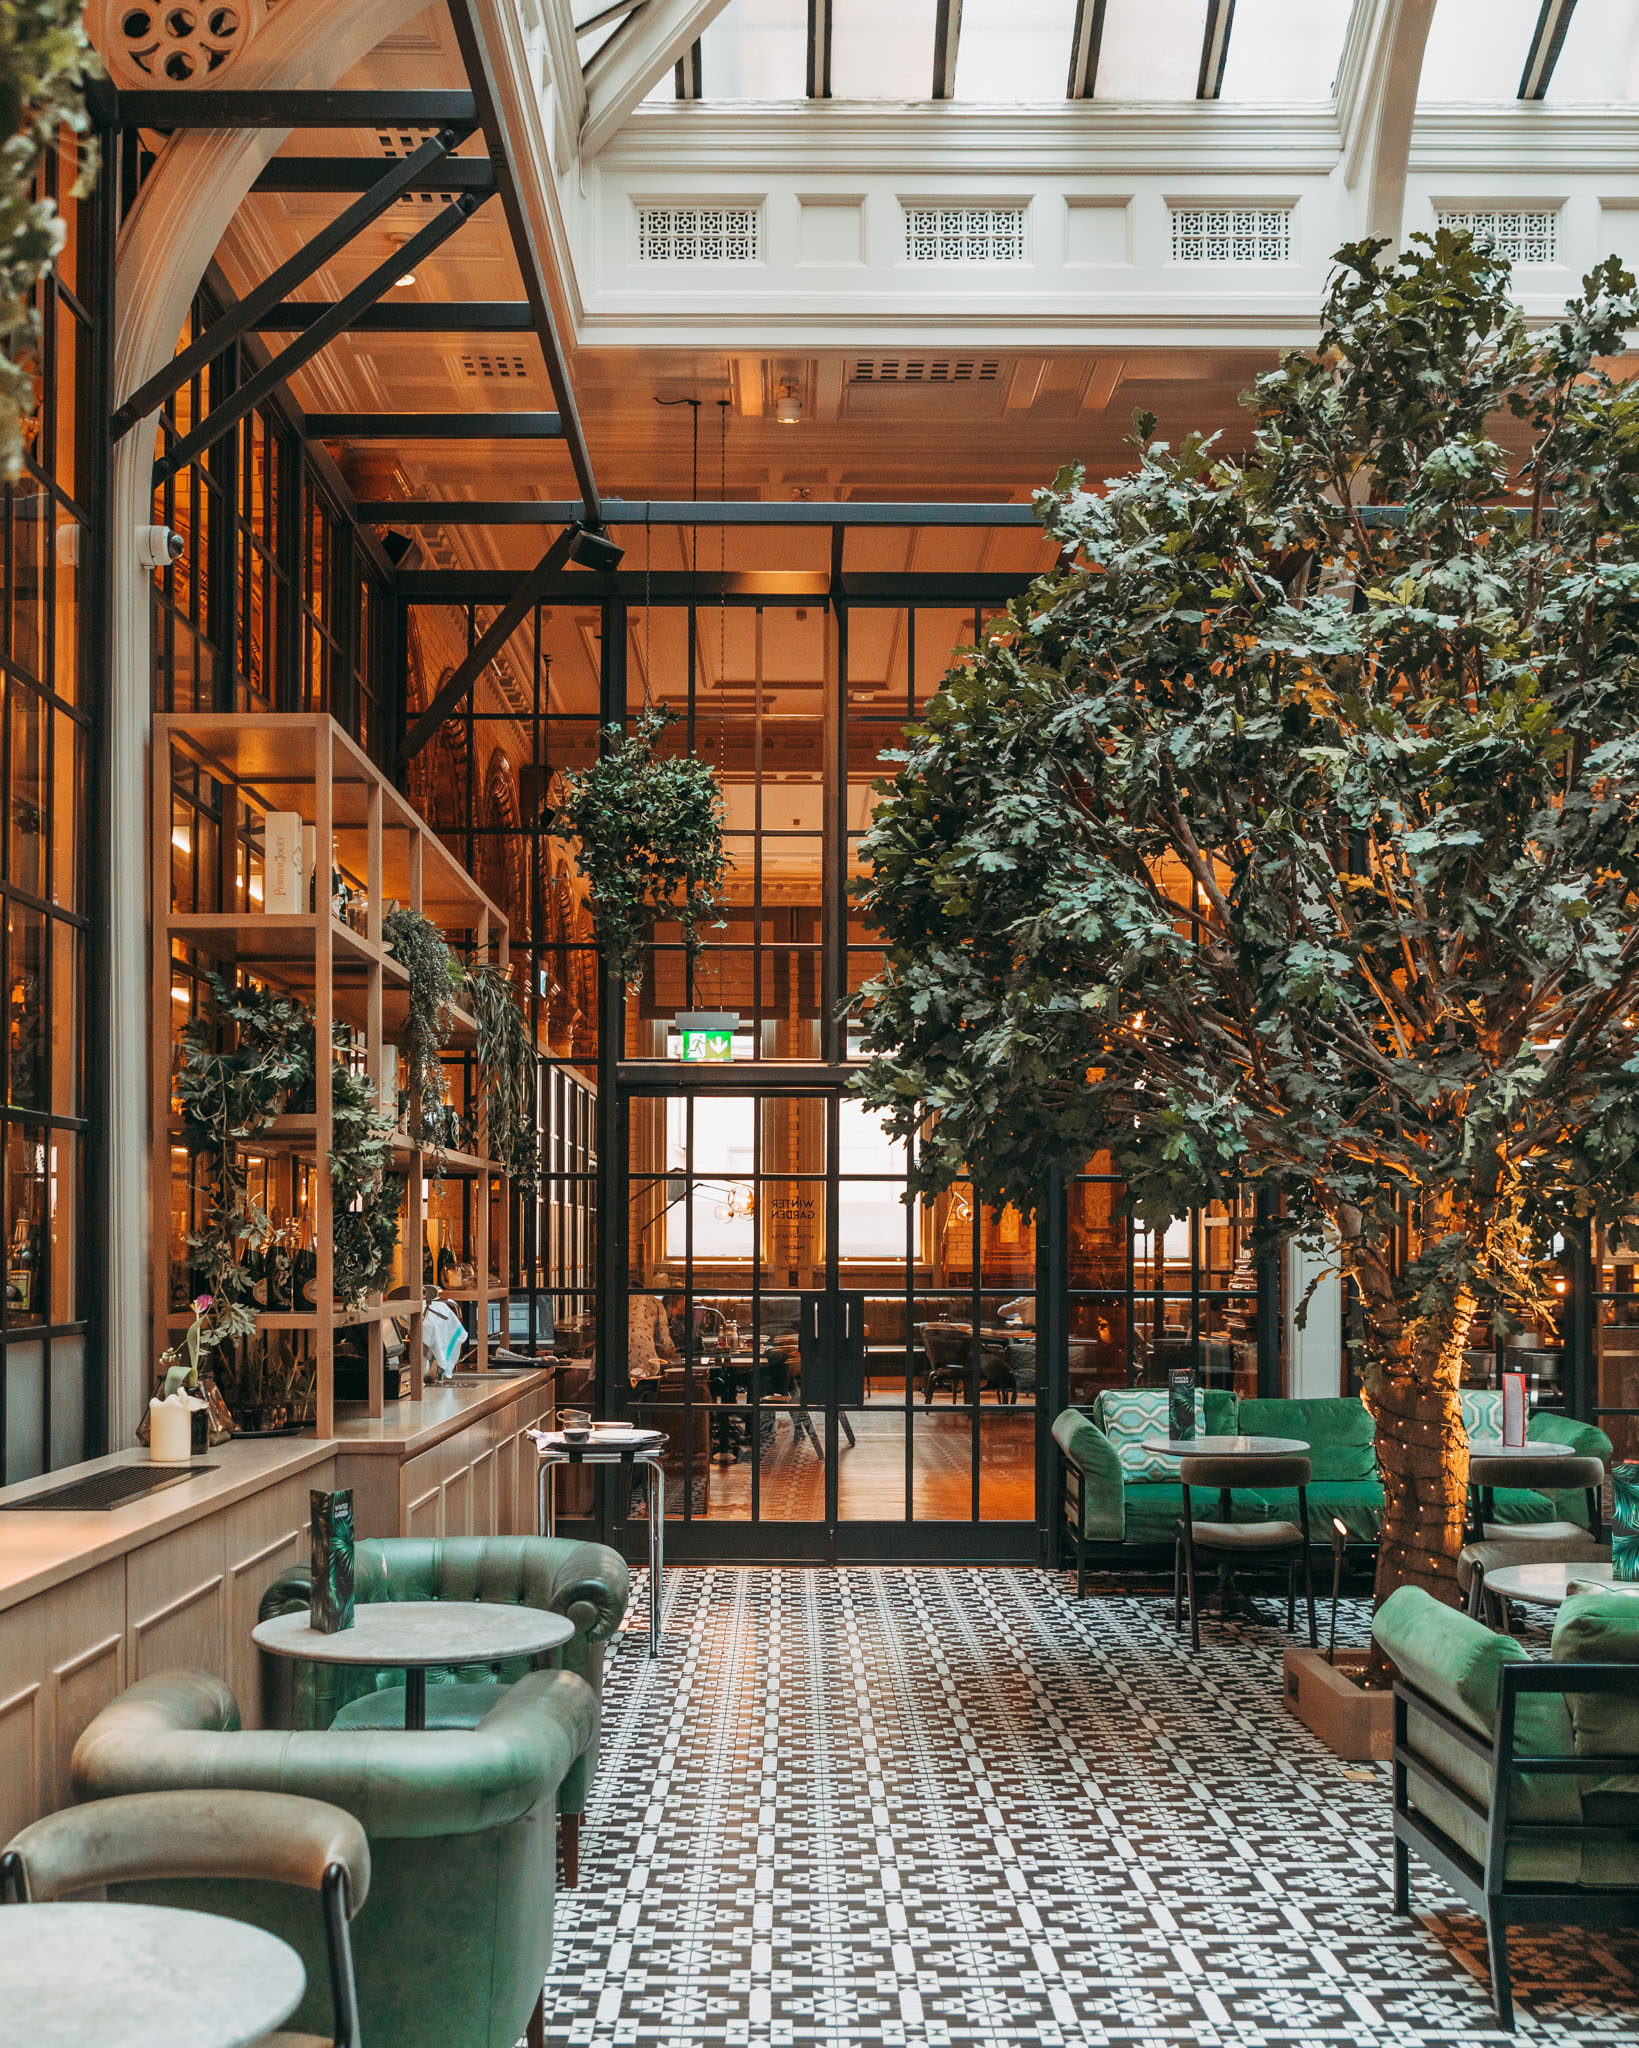 The Refuge in Manchester // 11 INSTAGRAM-WORTHY PHOTO SPOTS IN MANCHESTER, ENGLAND // www.readysetjetset.net #readysetjetset #manchester #england #uk #unitedkingdom #cityguide #travel